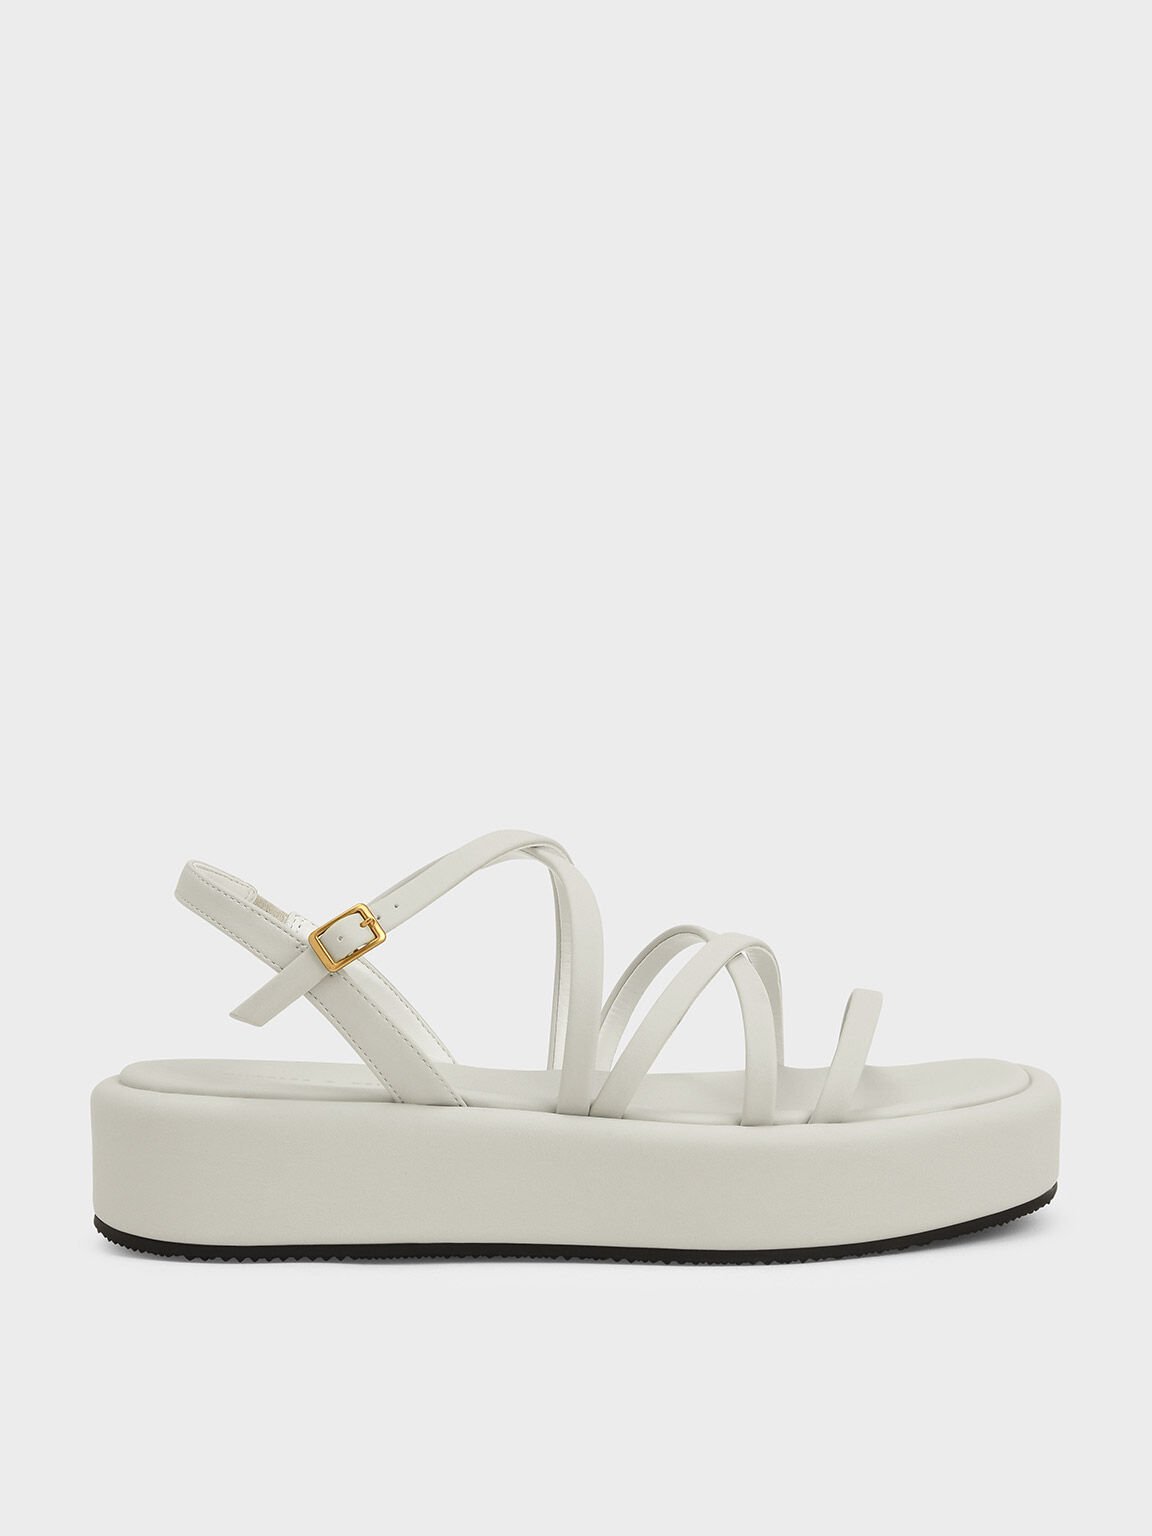 Charles Keith Sandals, Charles Keith Shoes Size